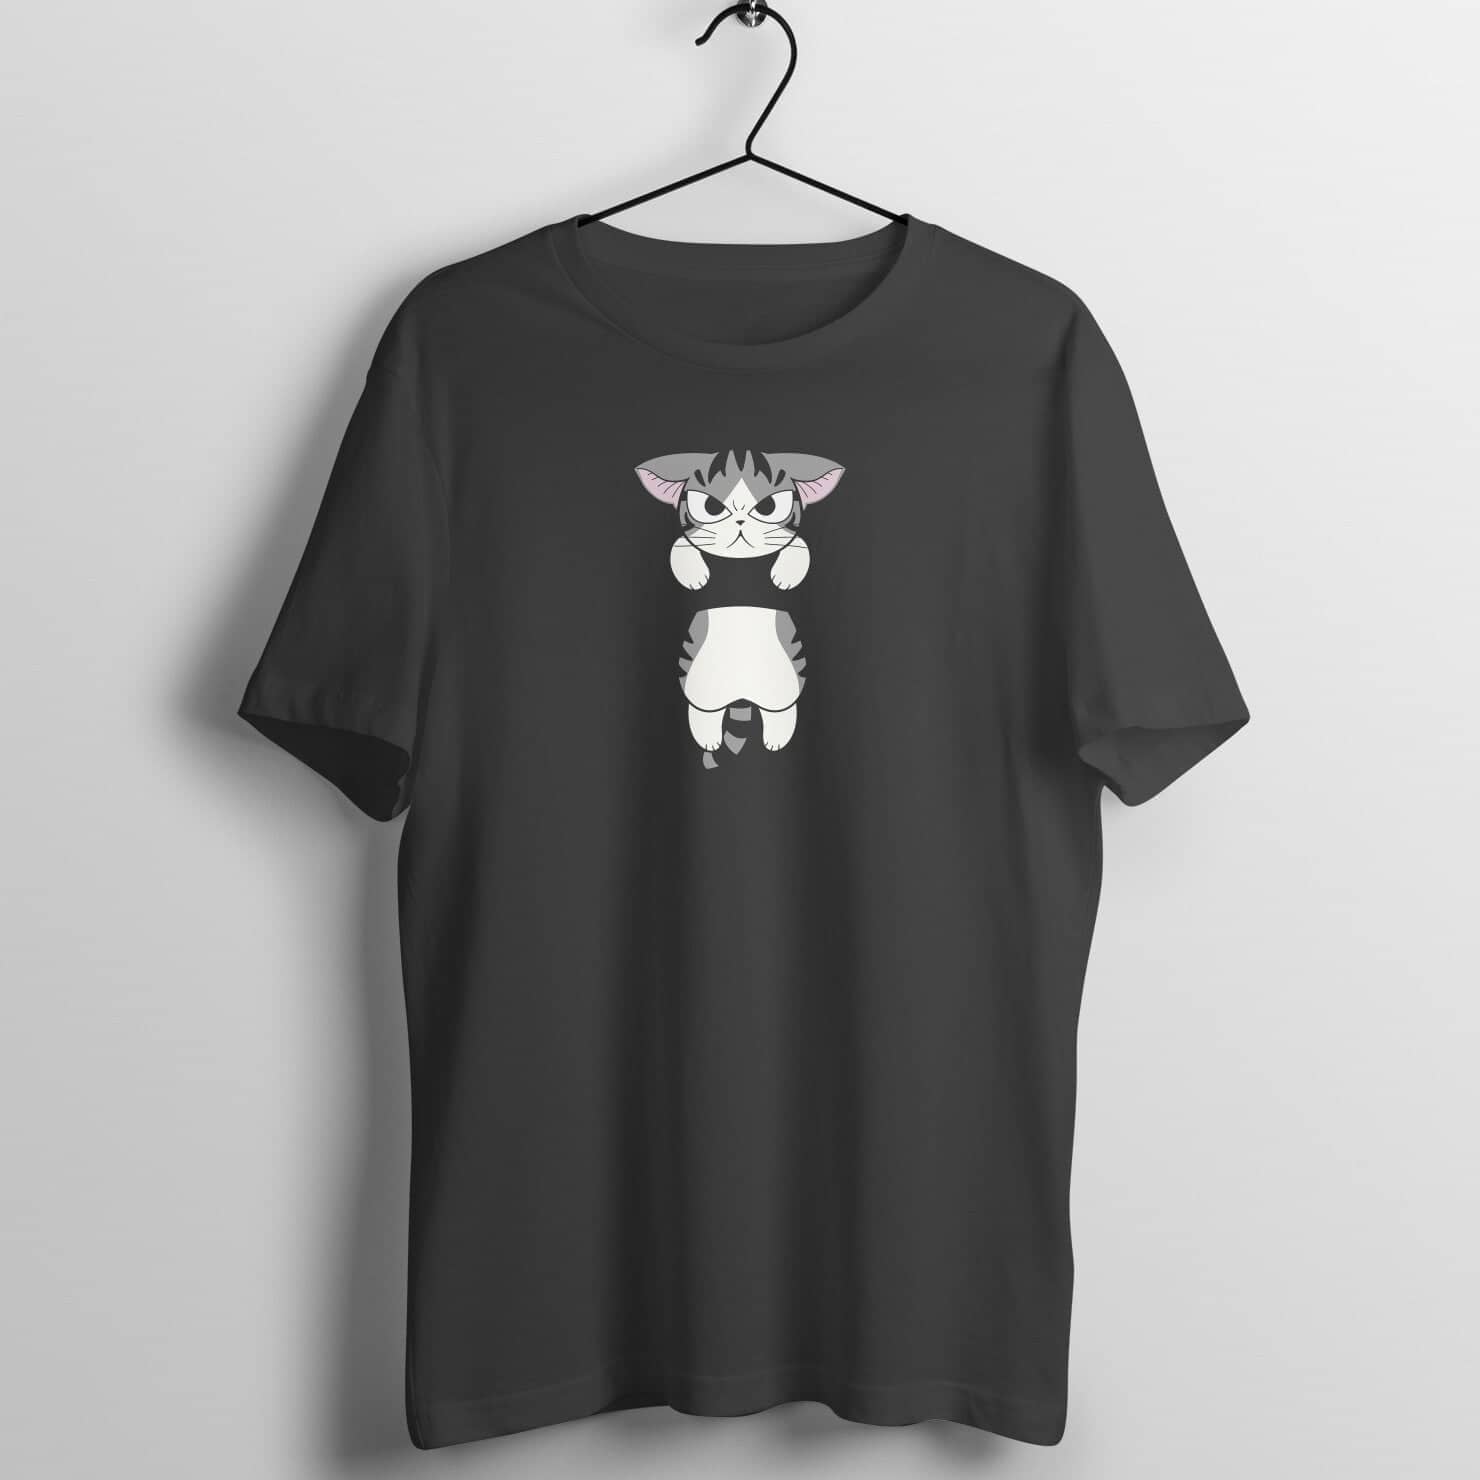 Cat Hanging Exclusive Black T Shirt for Men and Women Shirts & Tops Printrove Black S 